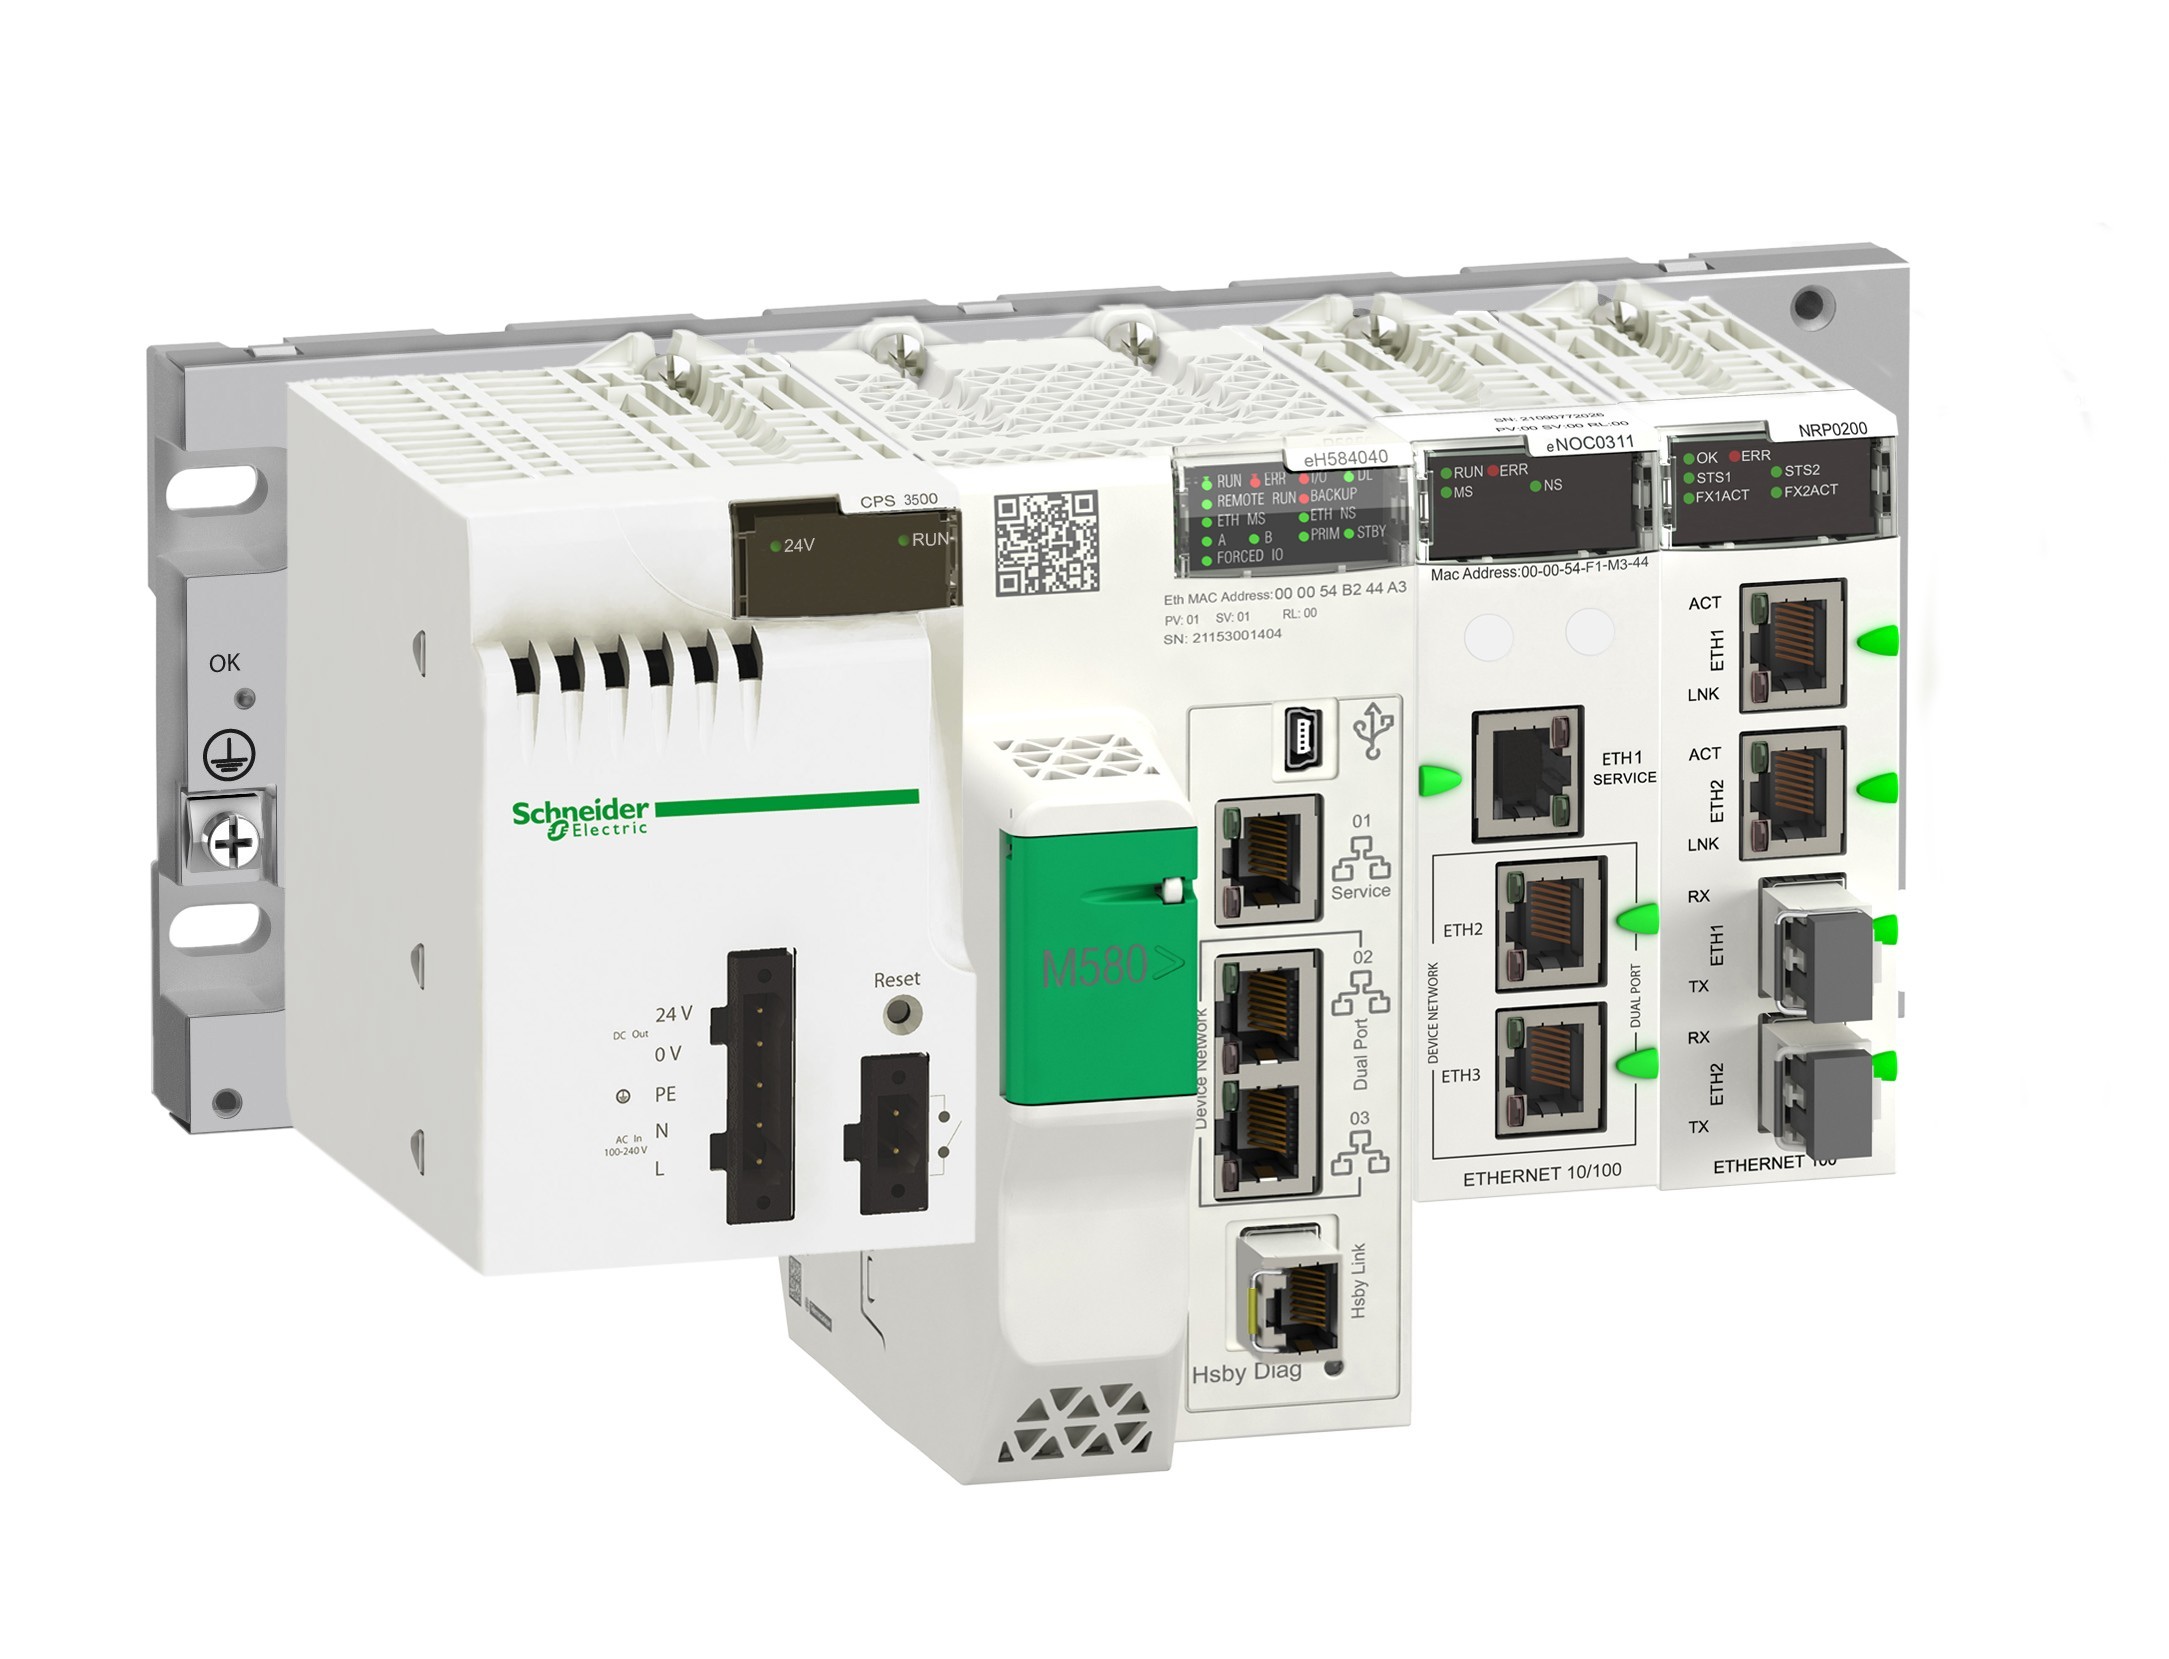 Schneider Electric’s Modicon M580 High End Programmable Automation Controllers (PACs) incorporate 16-MB Magnetoresistive RAM (MRAM) from Everspin Technologies to boost data-backup capabilities.